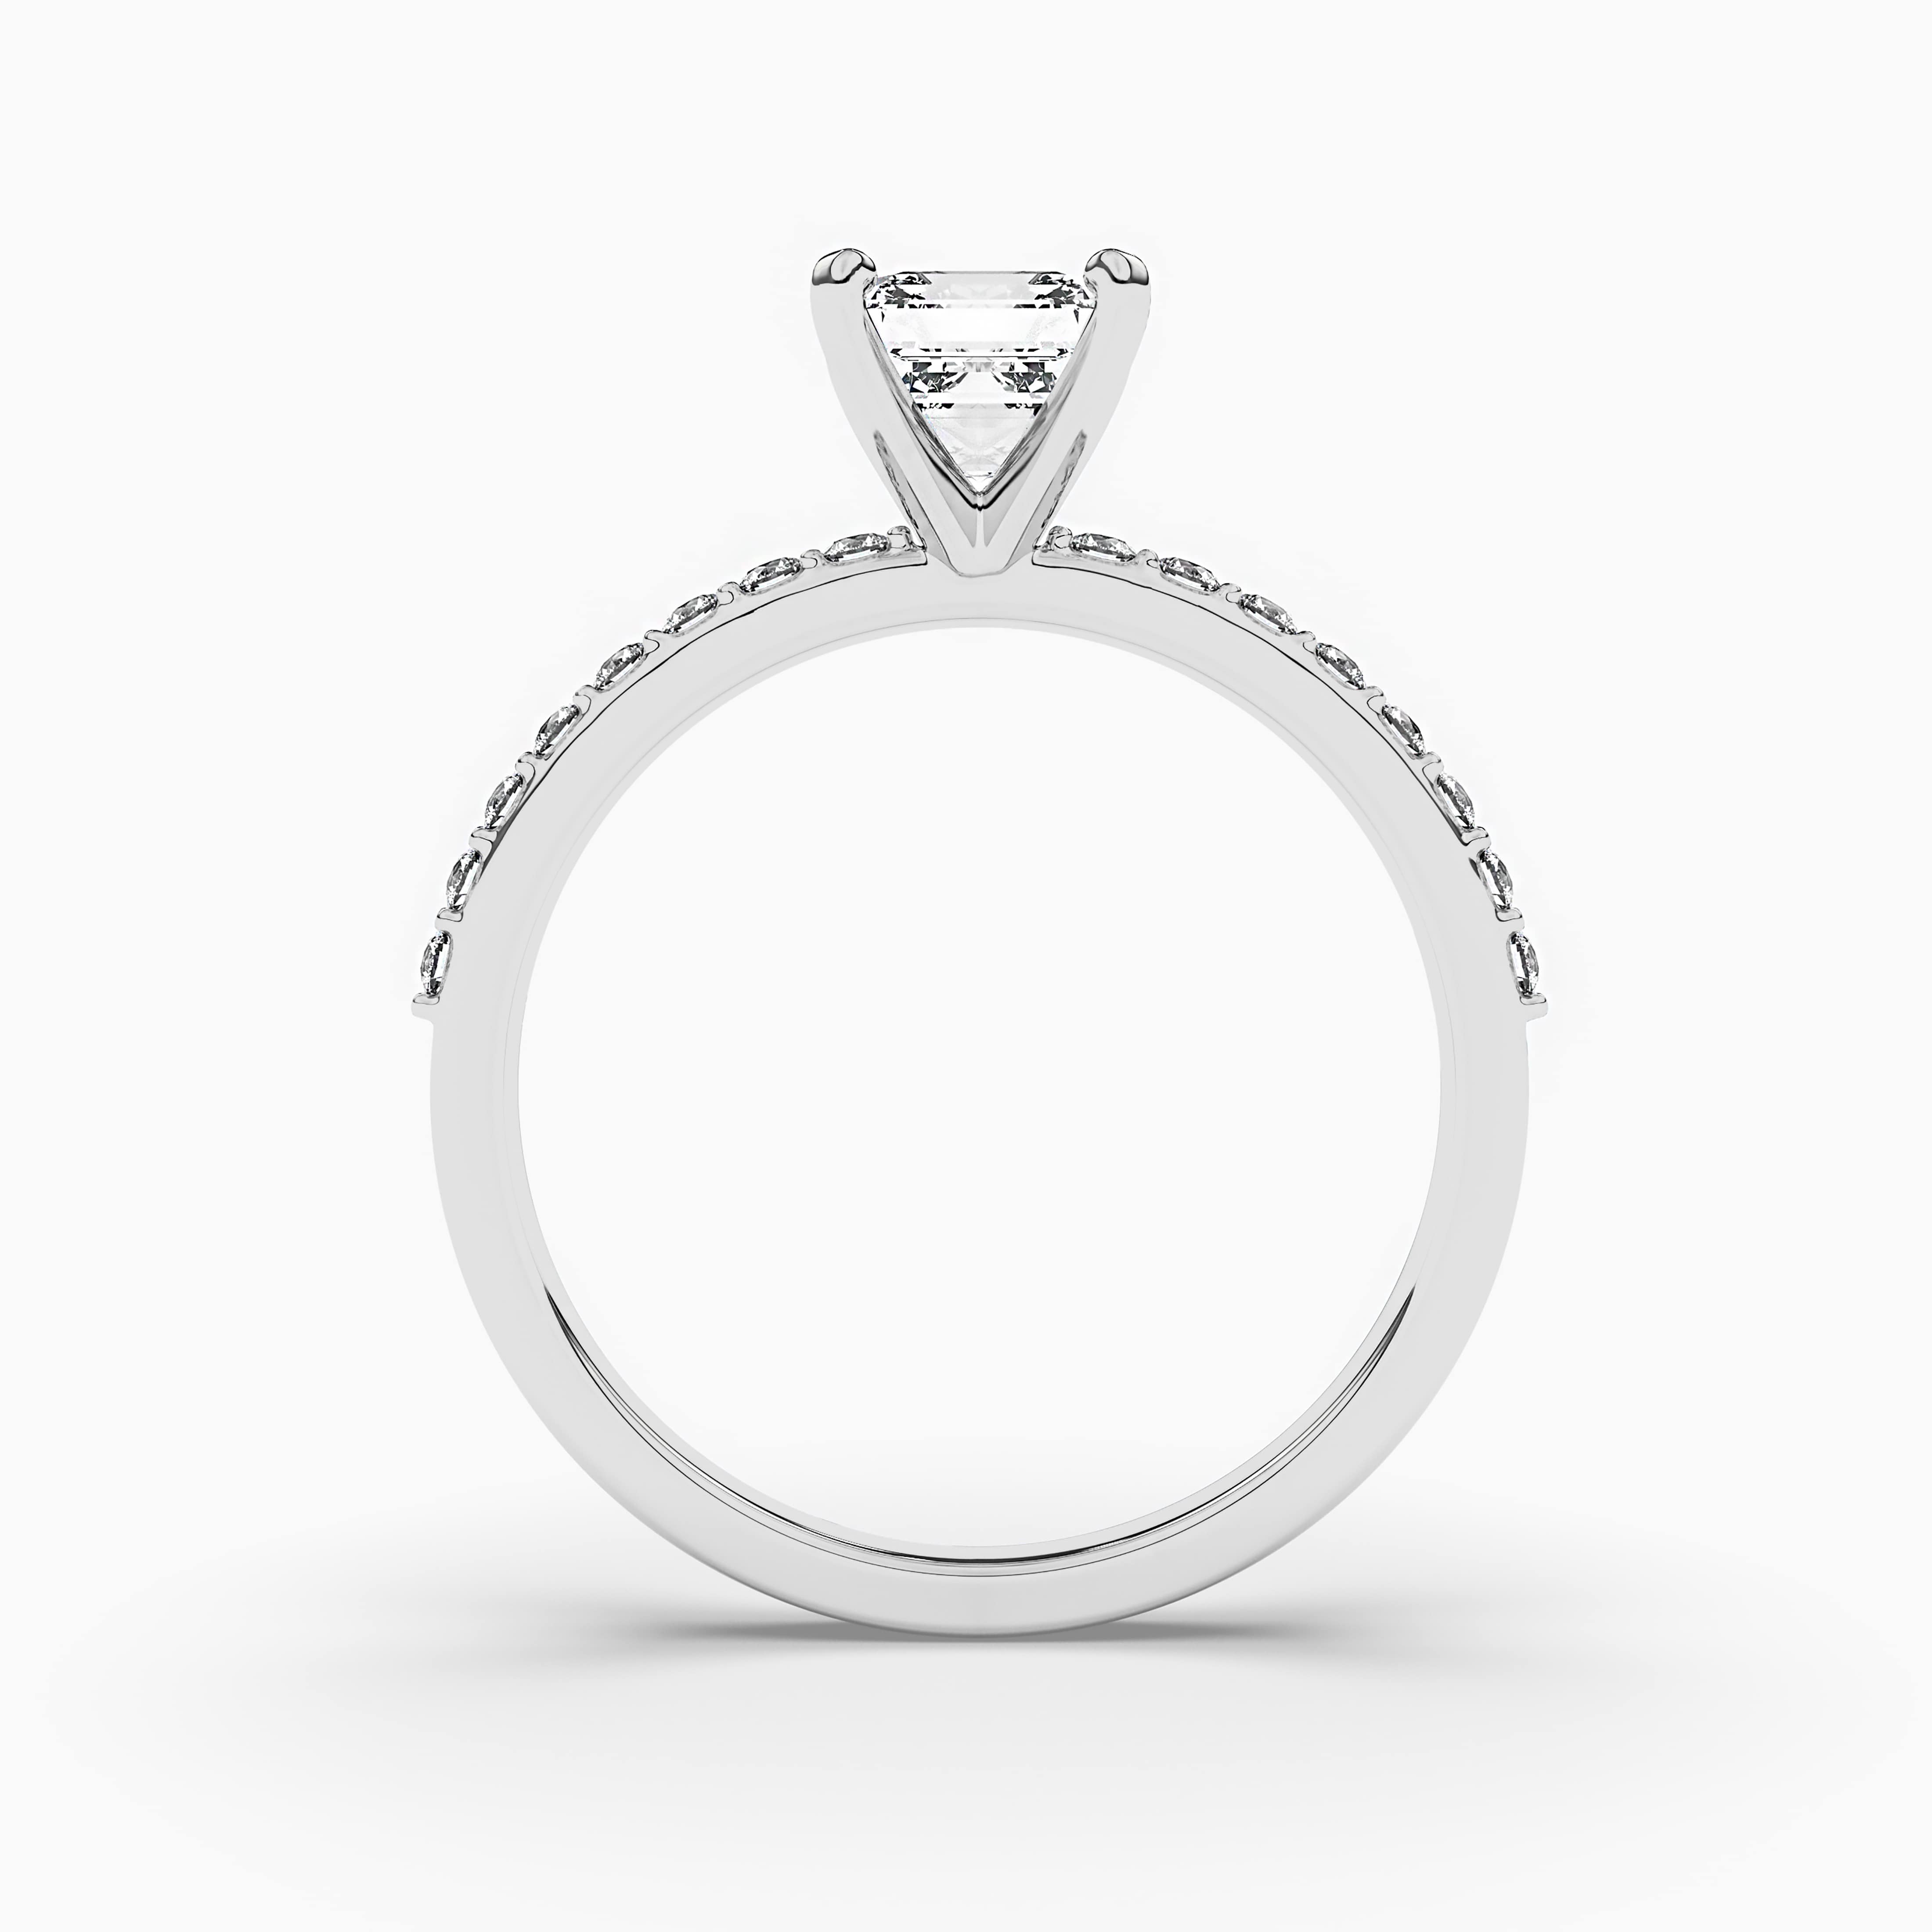 The Best Side Stones For Asscher Engagement Rings